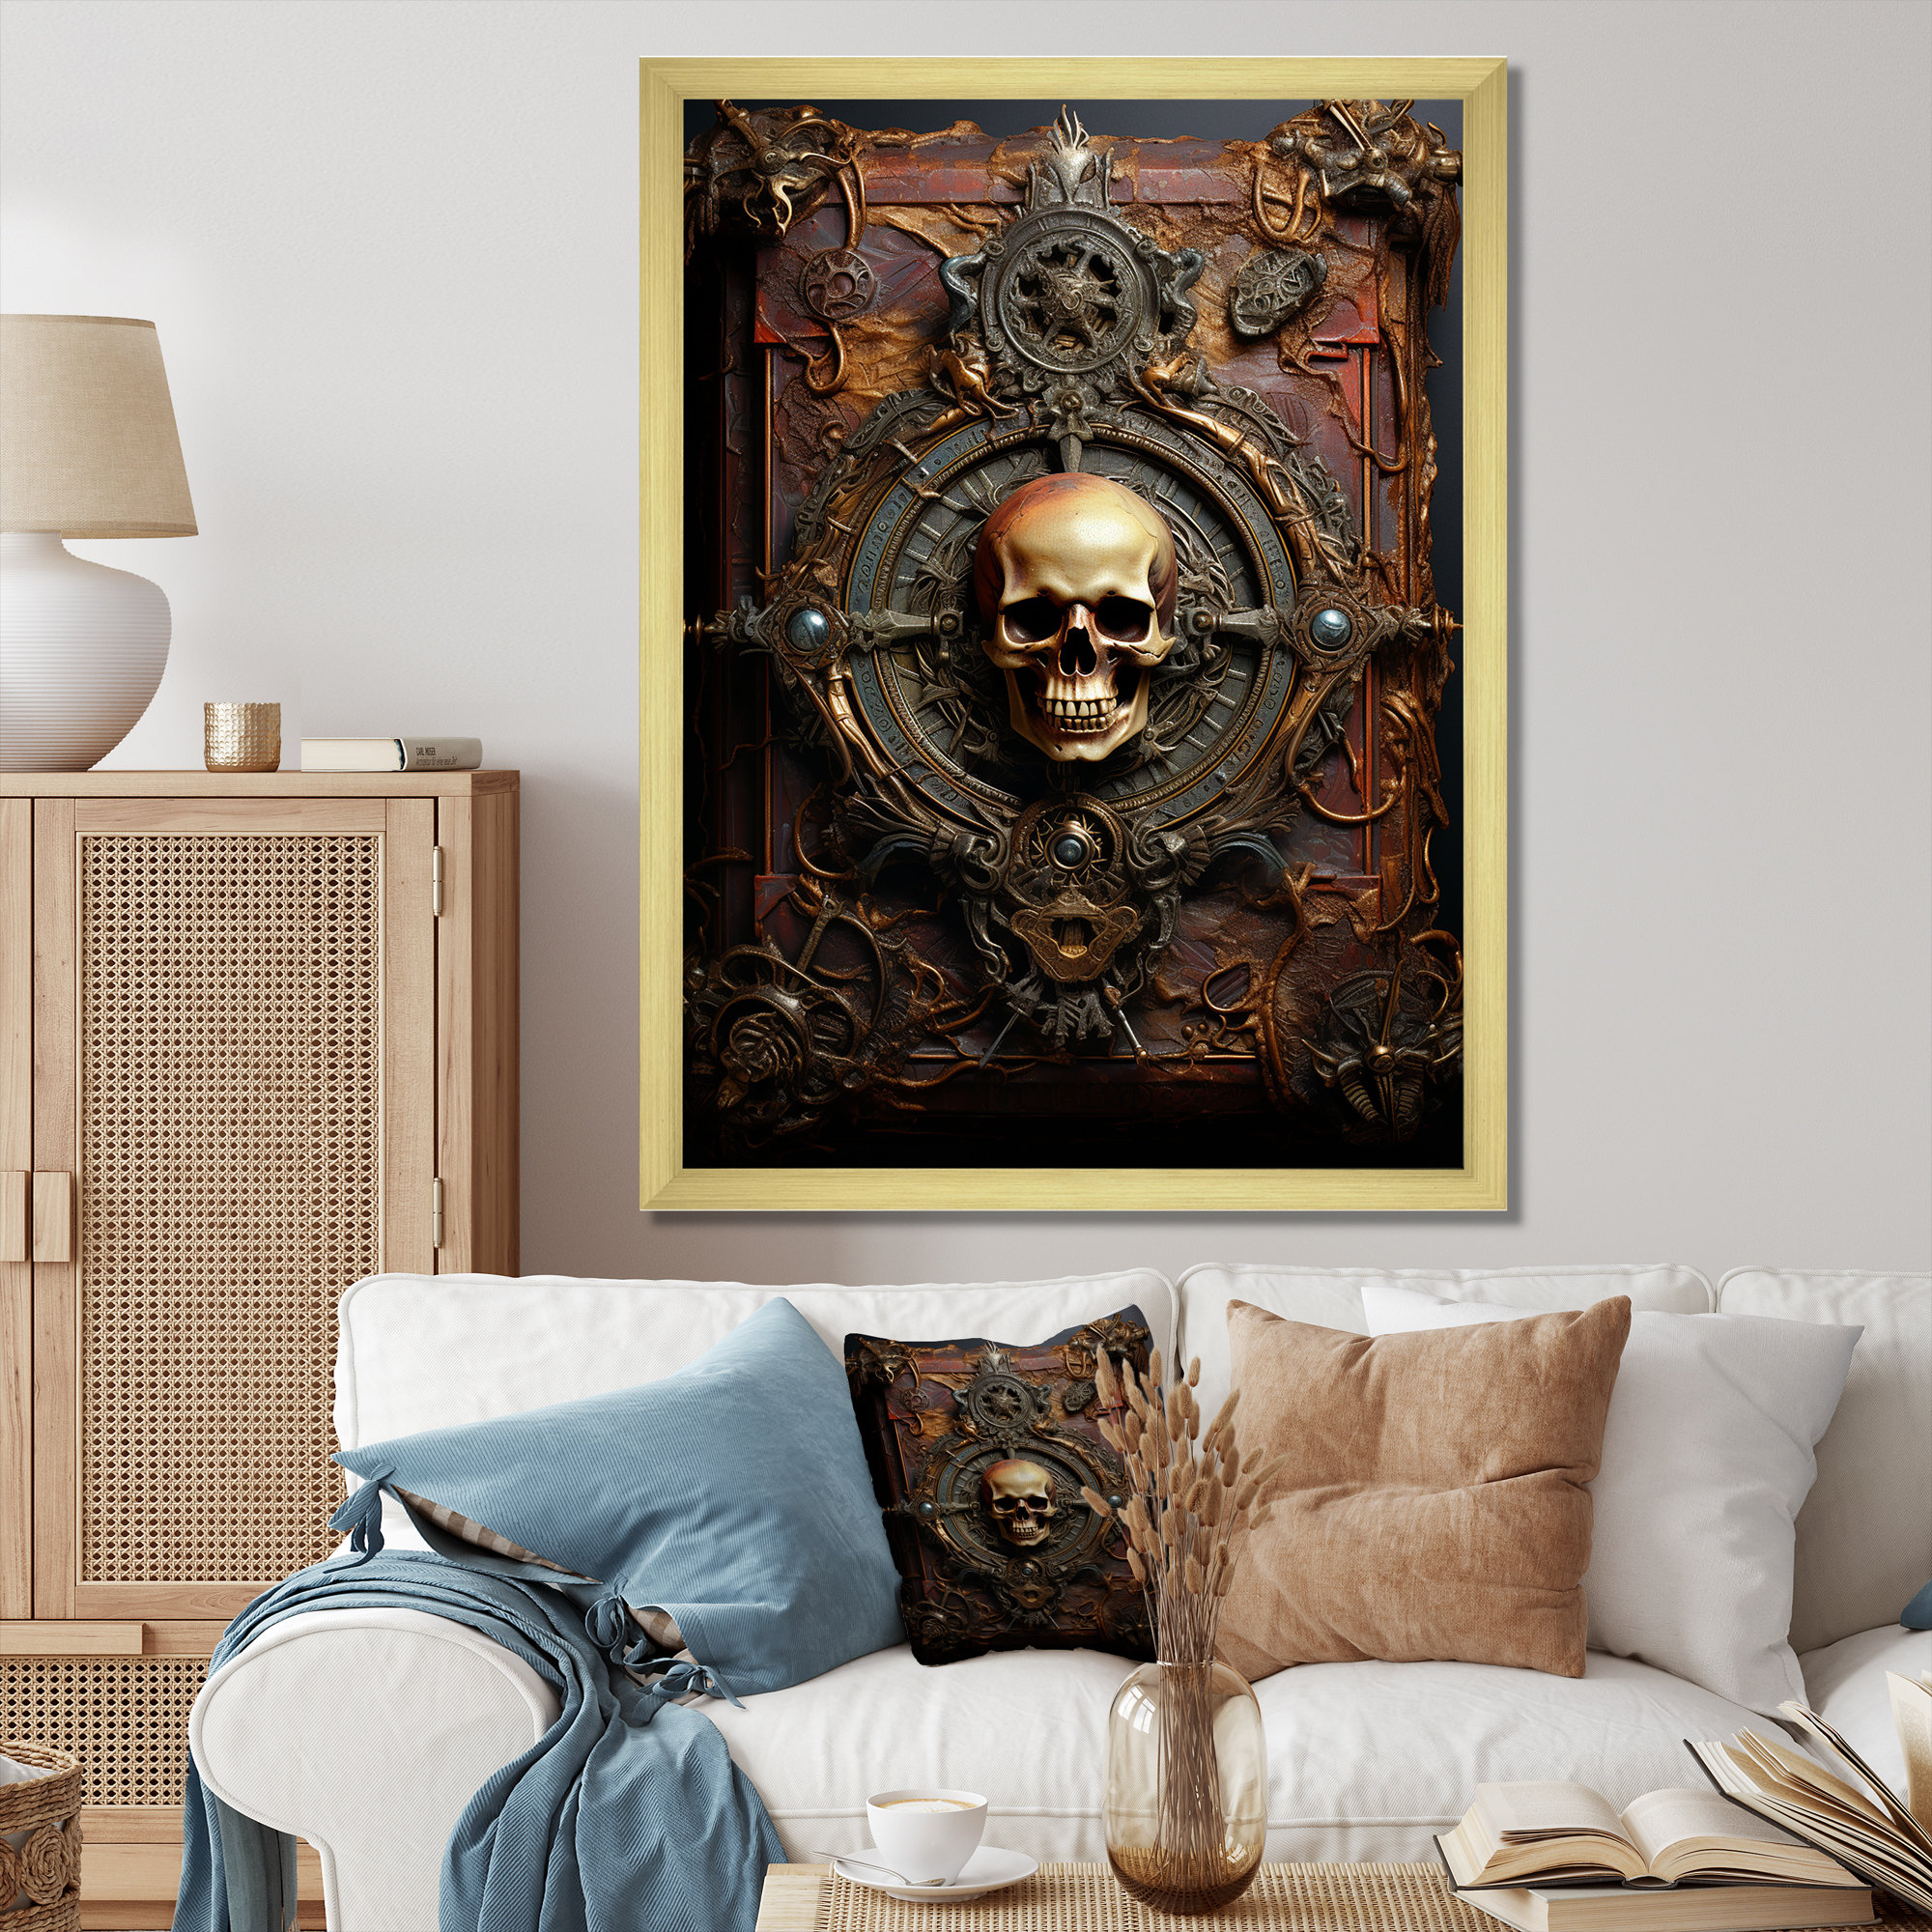 Pirate Code Book - Pirate Wall Art Living Room Trinx Format: Gold Picture Framed, Size: 44 H x 34 W x 1.5 D